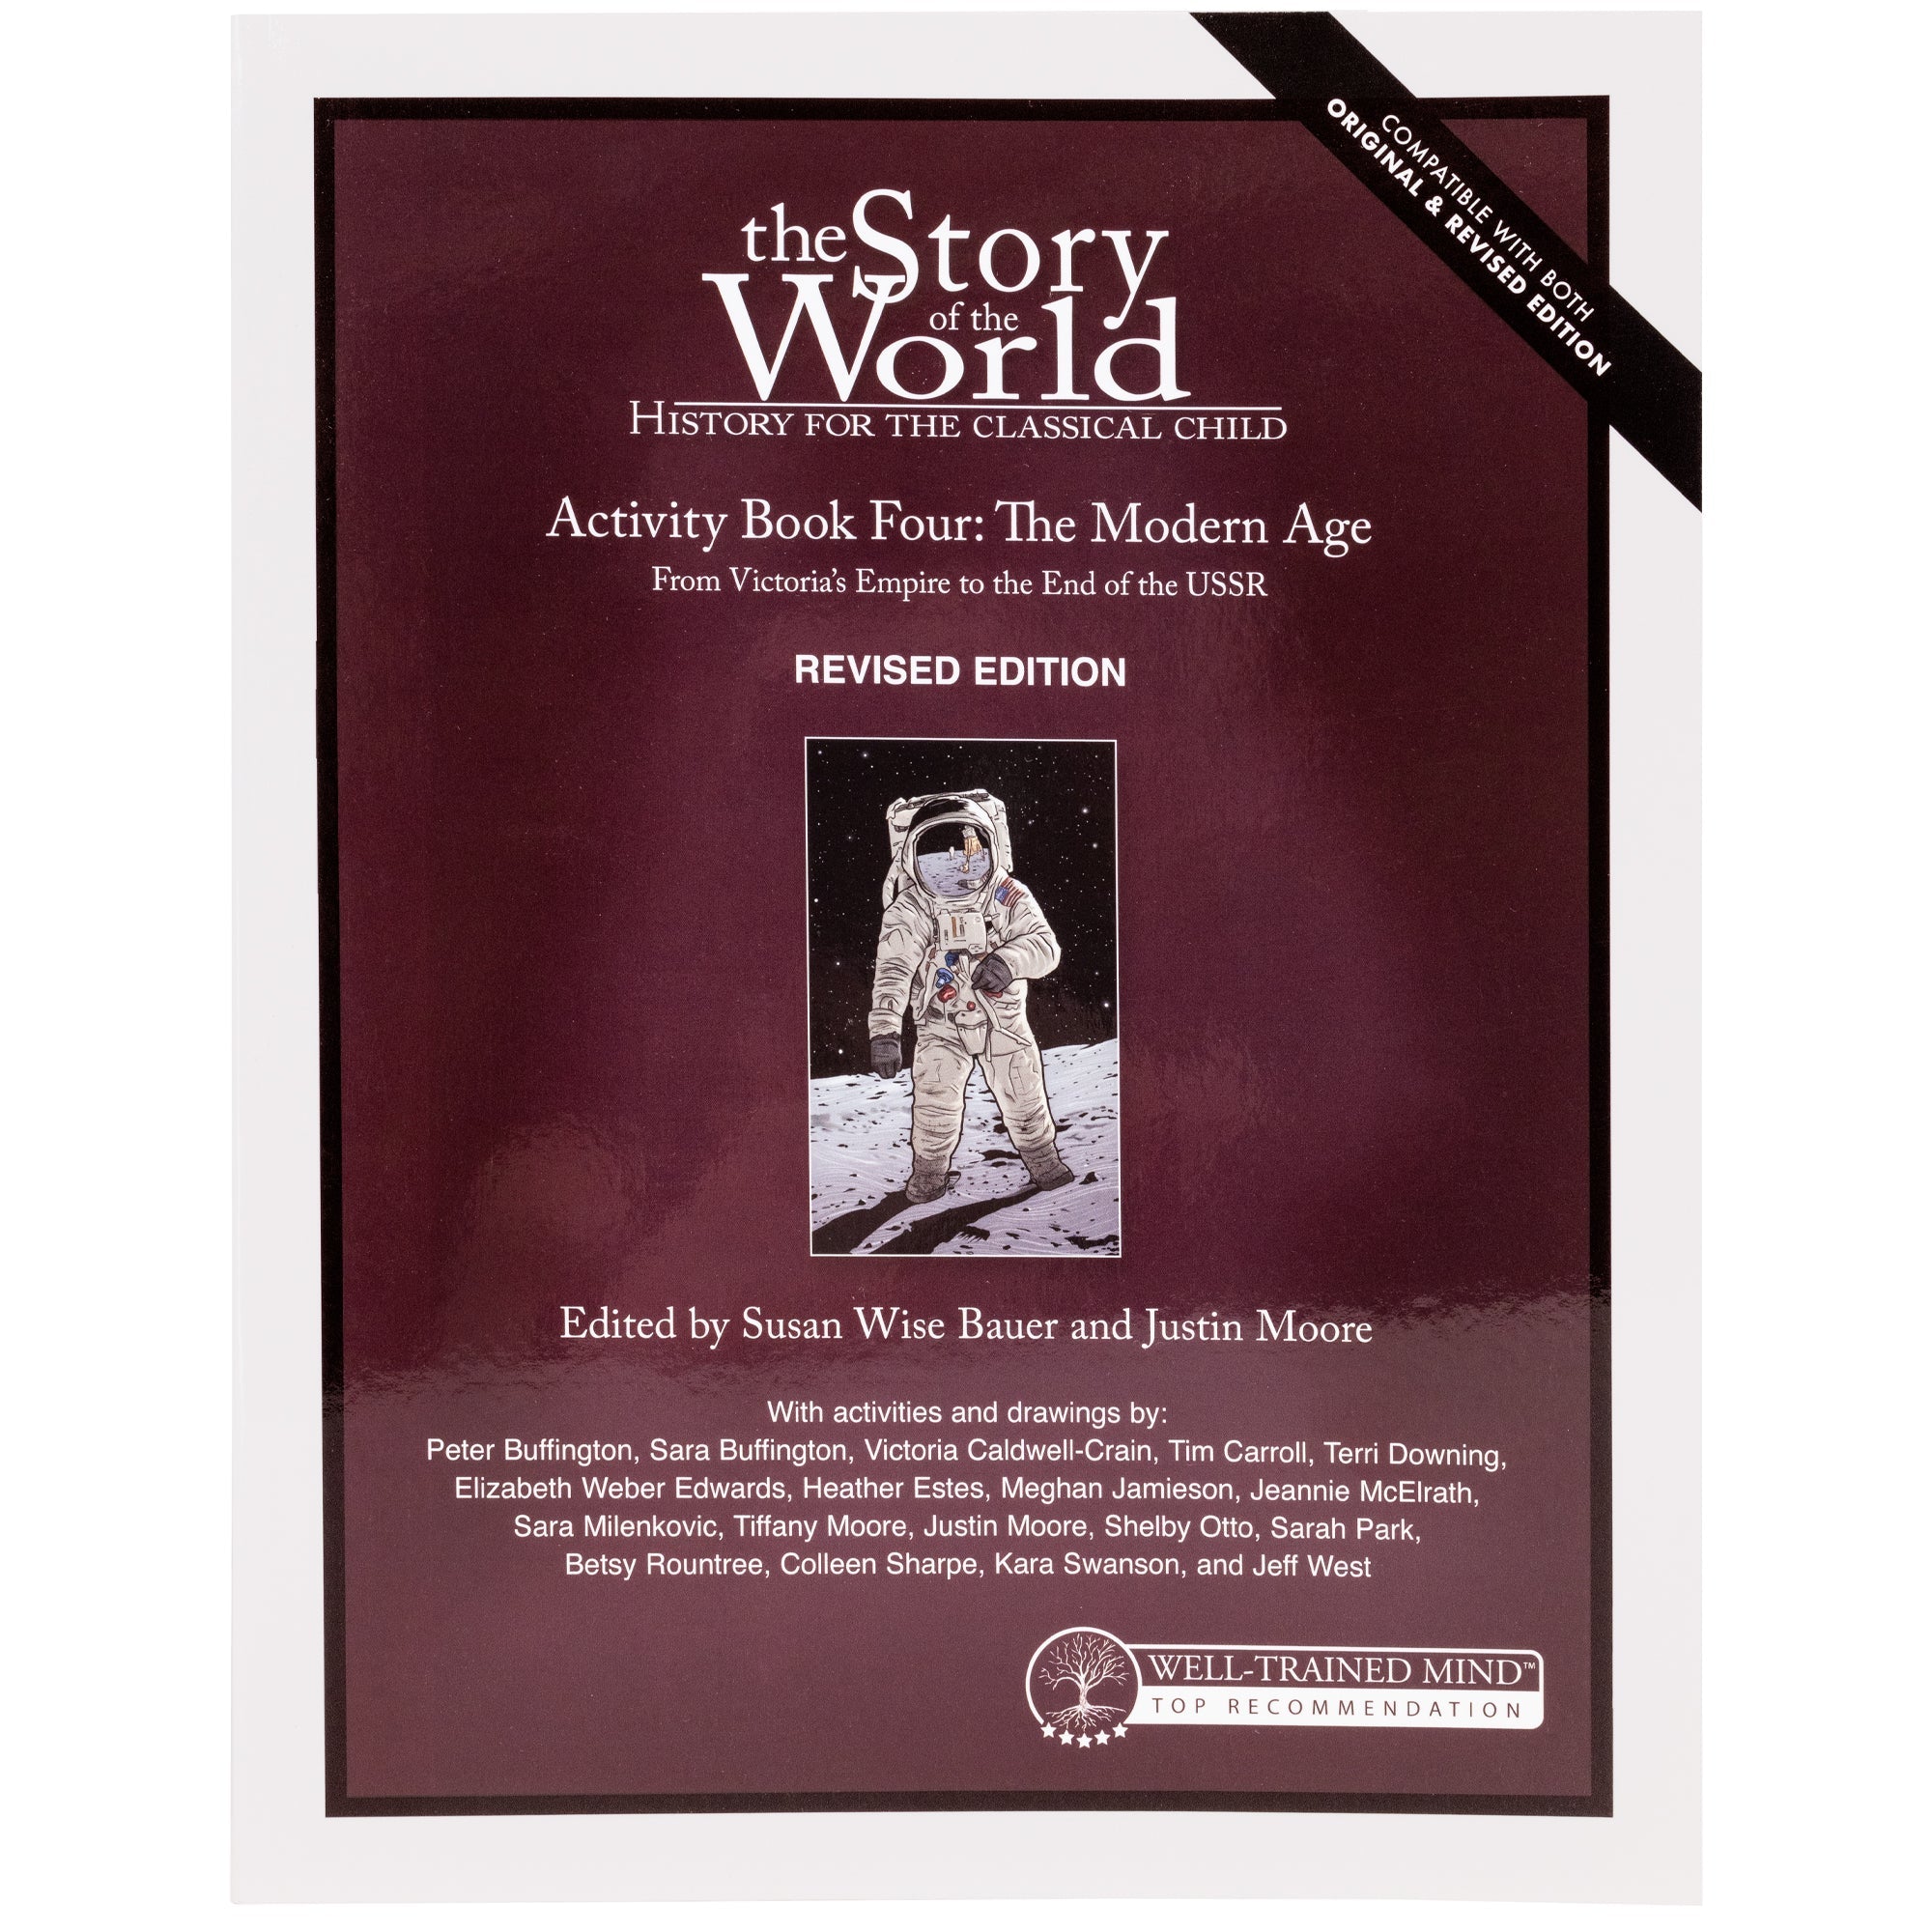 The Story of the World 4 Activity book cover. The cover is mainly burgundy with a black border and a white border on the outside. There is an illustration of an astronaut walking on the moon in the middle. The text on the cover is white and the main parts read; “The Story of the World. History for the Classical Child. Activity Book 4. The Modern Age. From Victoria’s Empire to the End of the USSR. Revised Edition. Edited by Susan Wise Bauer and Justin Moore.”